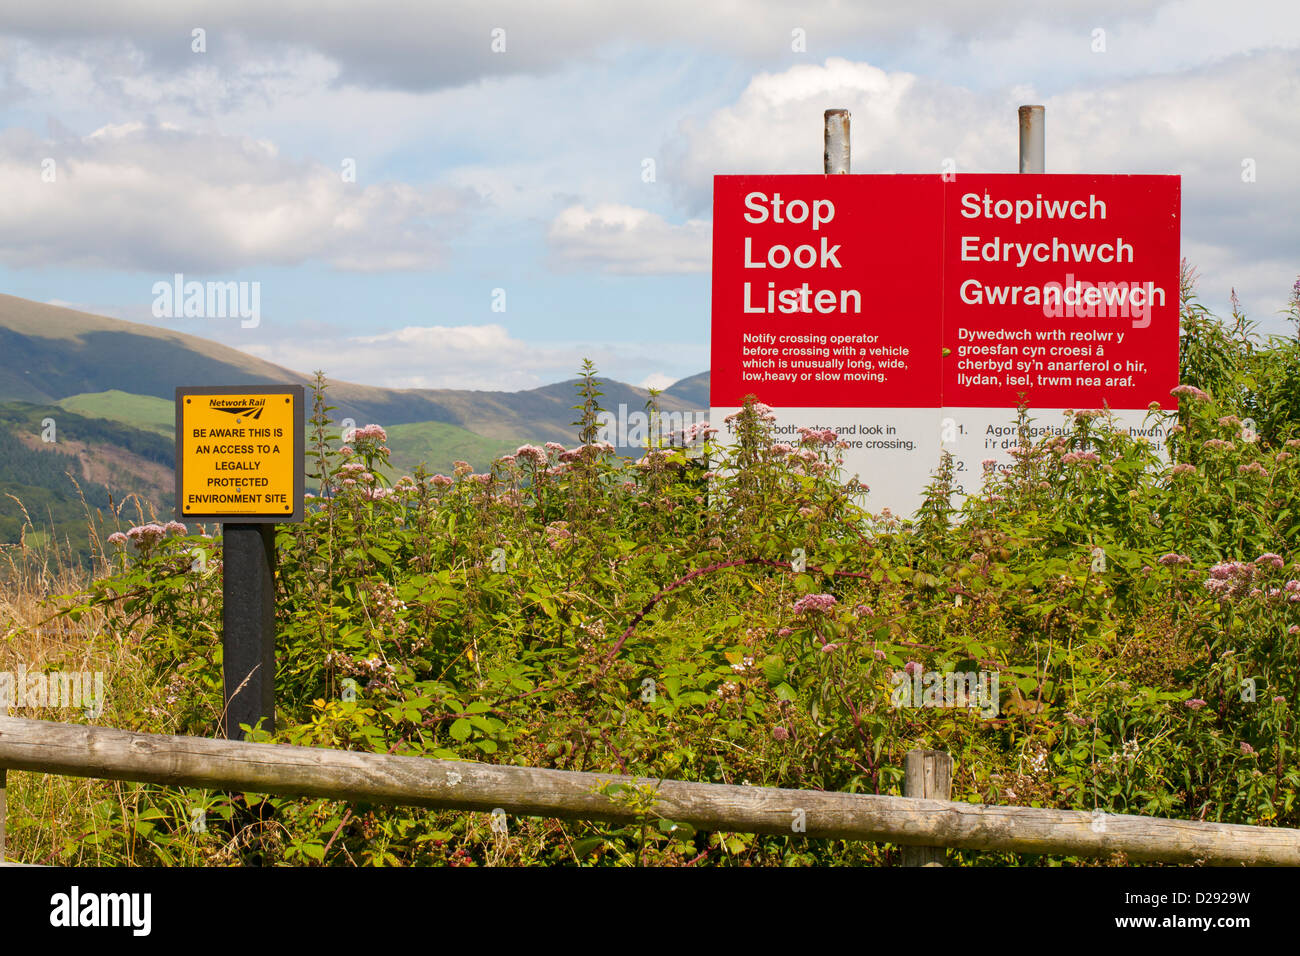 Stop, Look, Listen sign and others at a rural farm railway crossing. RSPB Ynys Hir reserve. Ceredigion, Wales. August. Stock Photo